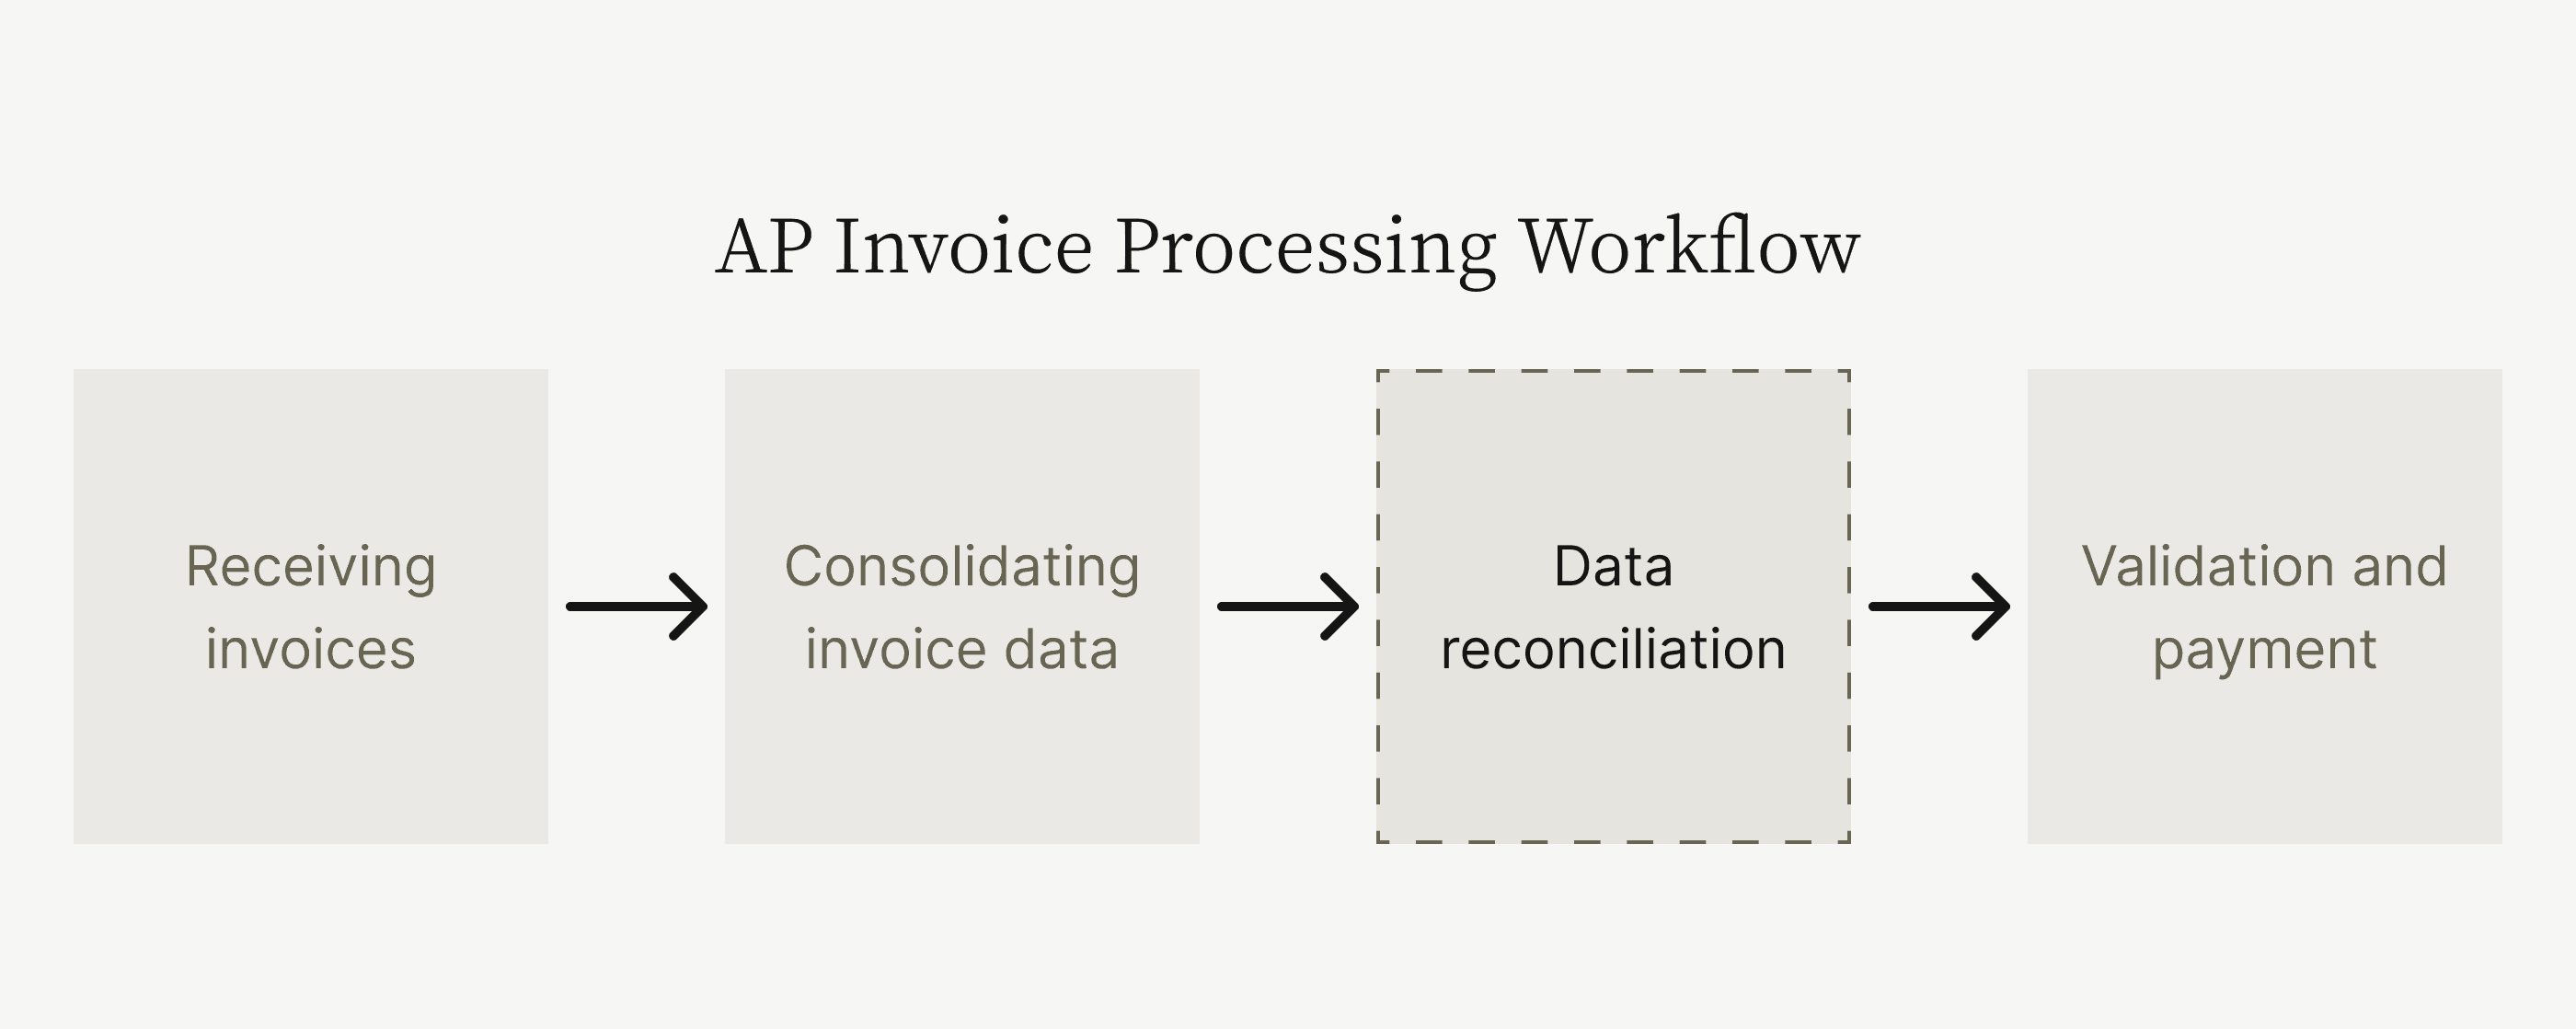 AP invoice processing workflow step 3: data reconciliation